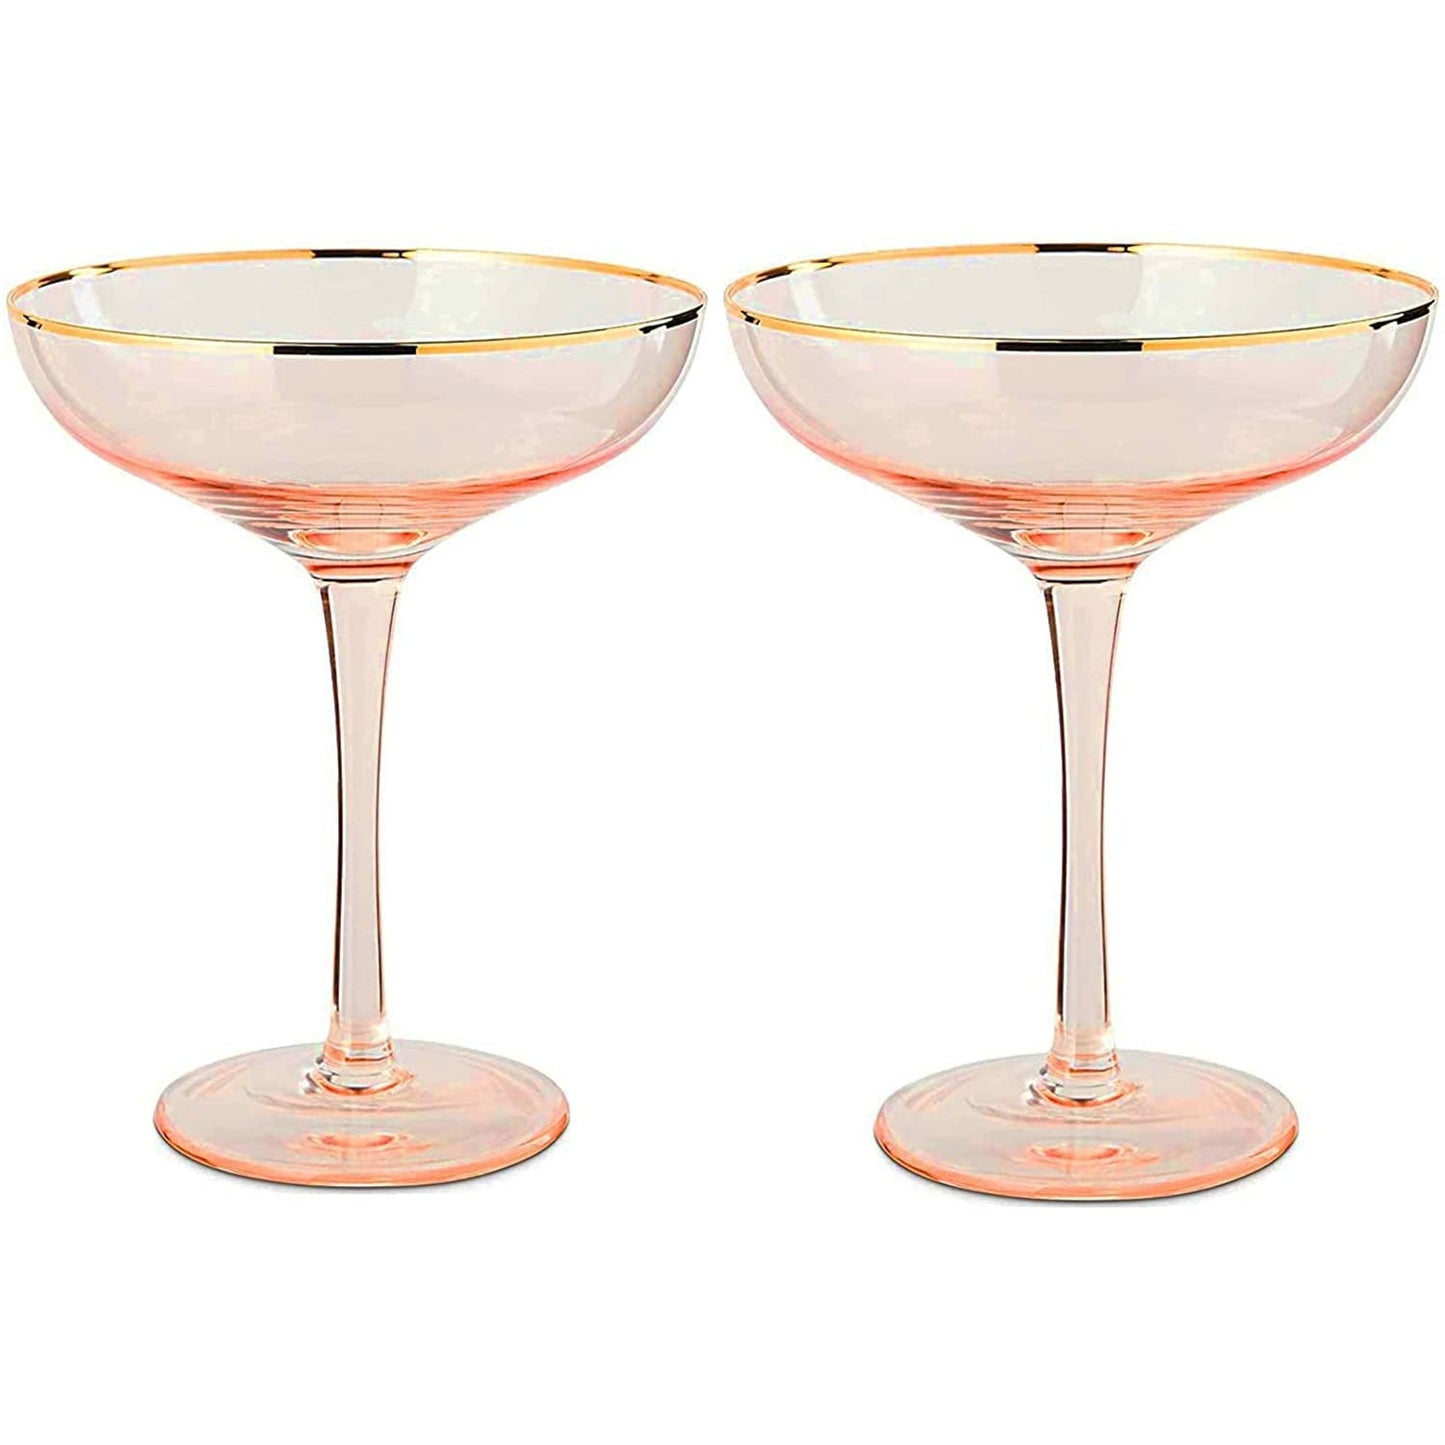 The Wine Savant - Gilded Pink Rim Coupe Cocktail Glasses (set of 2) - 9oz